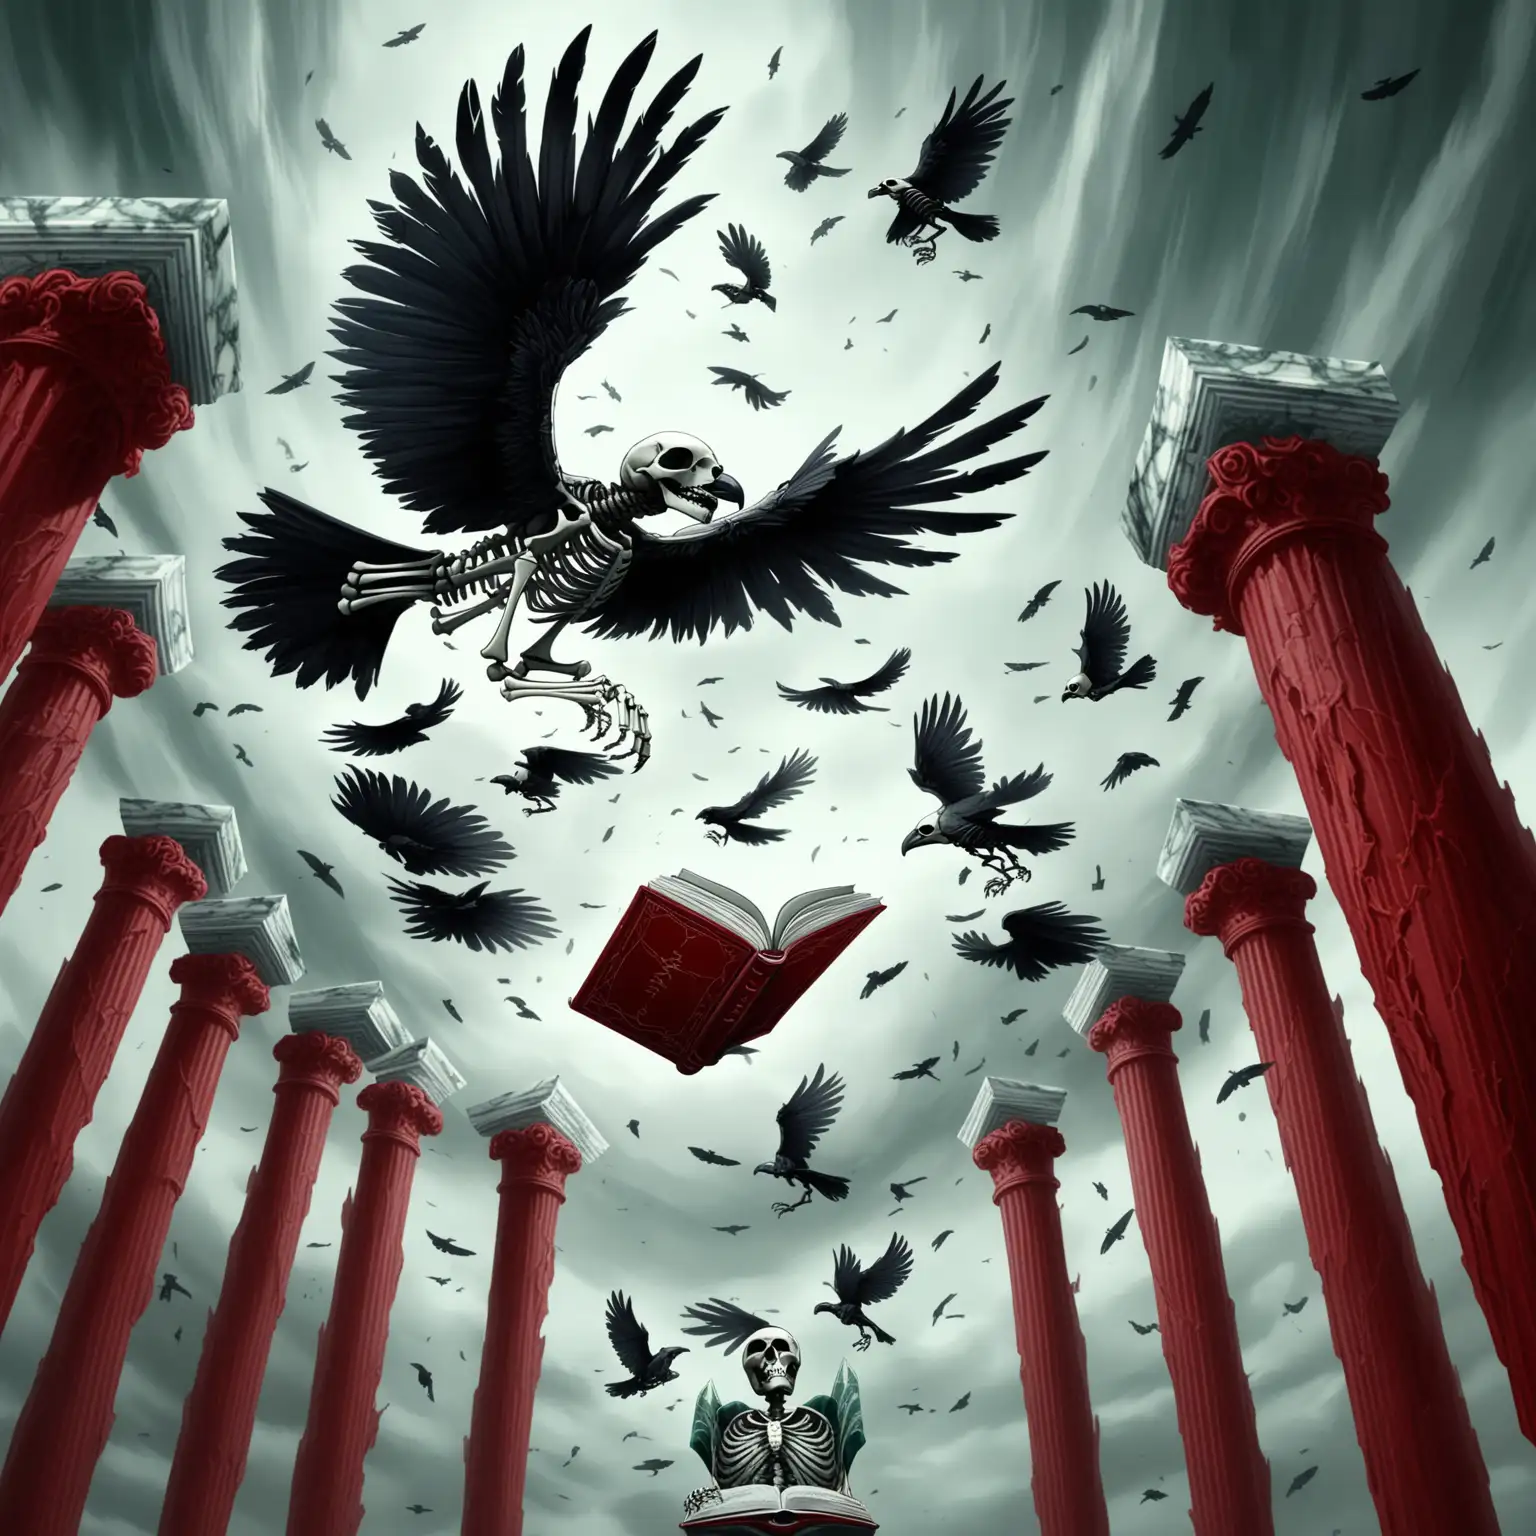 head raven skeleton, flying book in the sky, marble pillars, red ambiant, green ambiant, grey sky